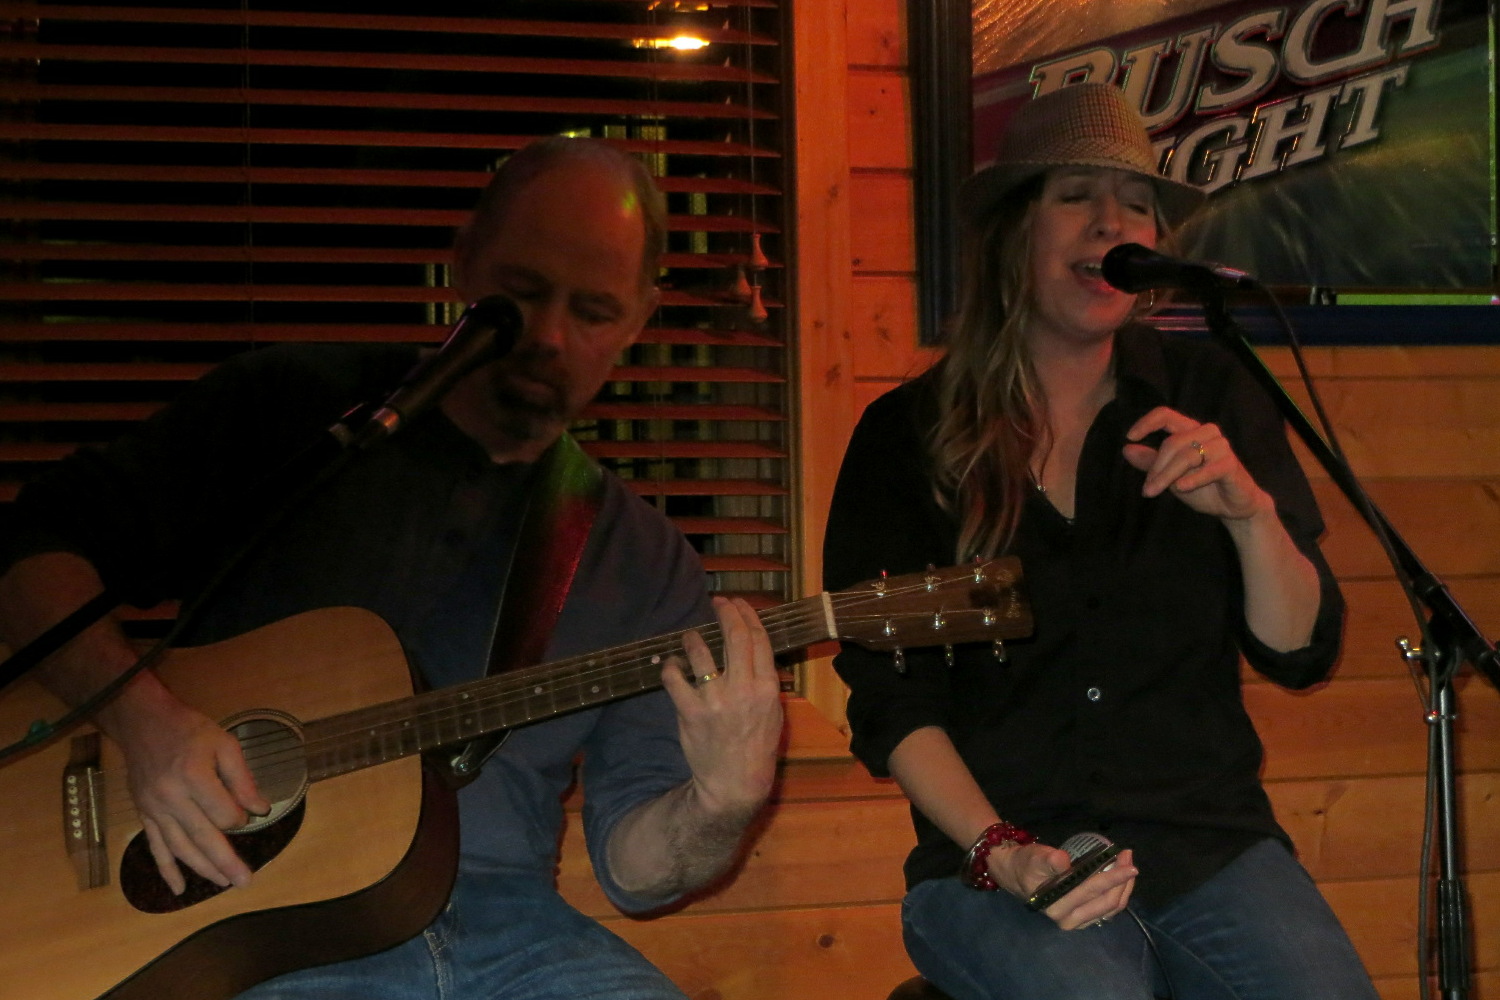 Live Music at The Mint Bar in Norfolk, Nebraska - 
						Northeast Nebraska Musicians Acoustic Boogie Trio    
						performing live at the 
						New Year's Eve Party at 
						The Mint Bar in Norfolk, Nebraska 
						on Thursday, December 31, 2015.
						The Mint Bar is located at 
						304 Northwestern Avenue, 
						Norfolk, NE 68701, 
						Phone: (402) 371-9837.